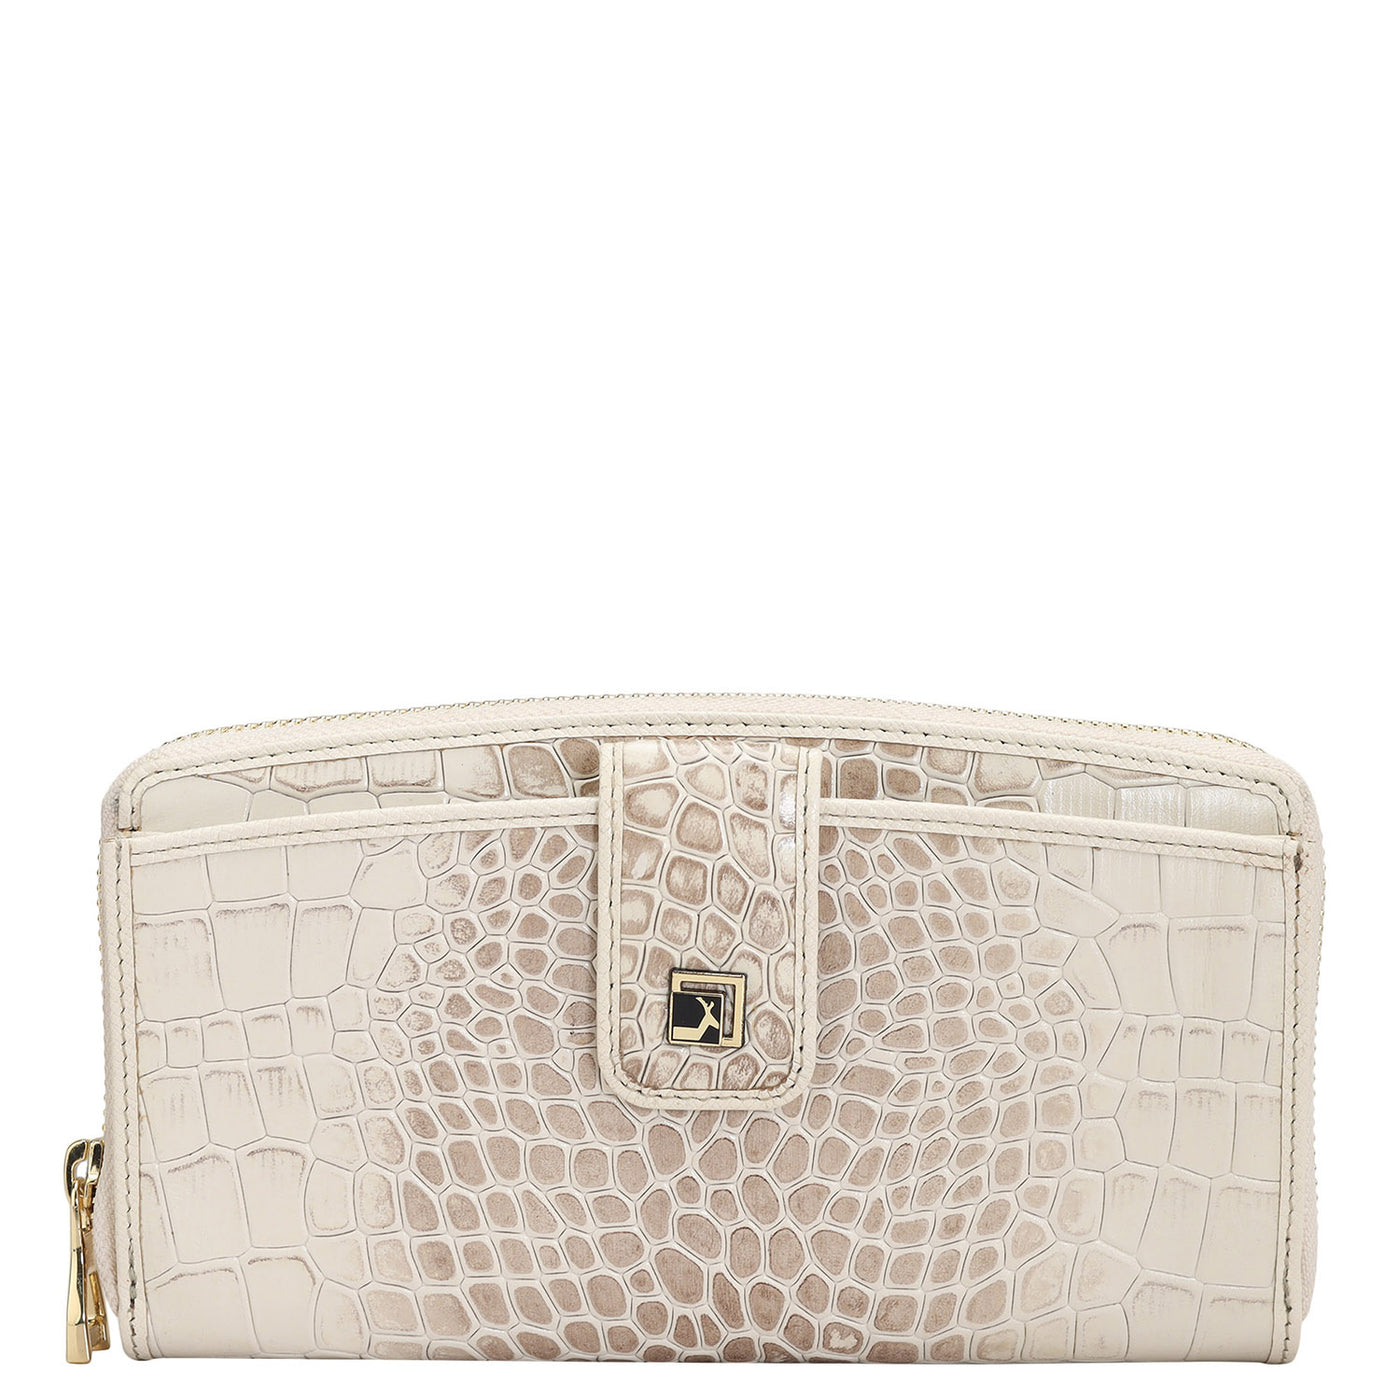 Croco Leather Ladies Wallet - Frost